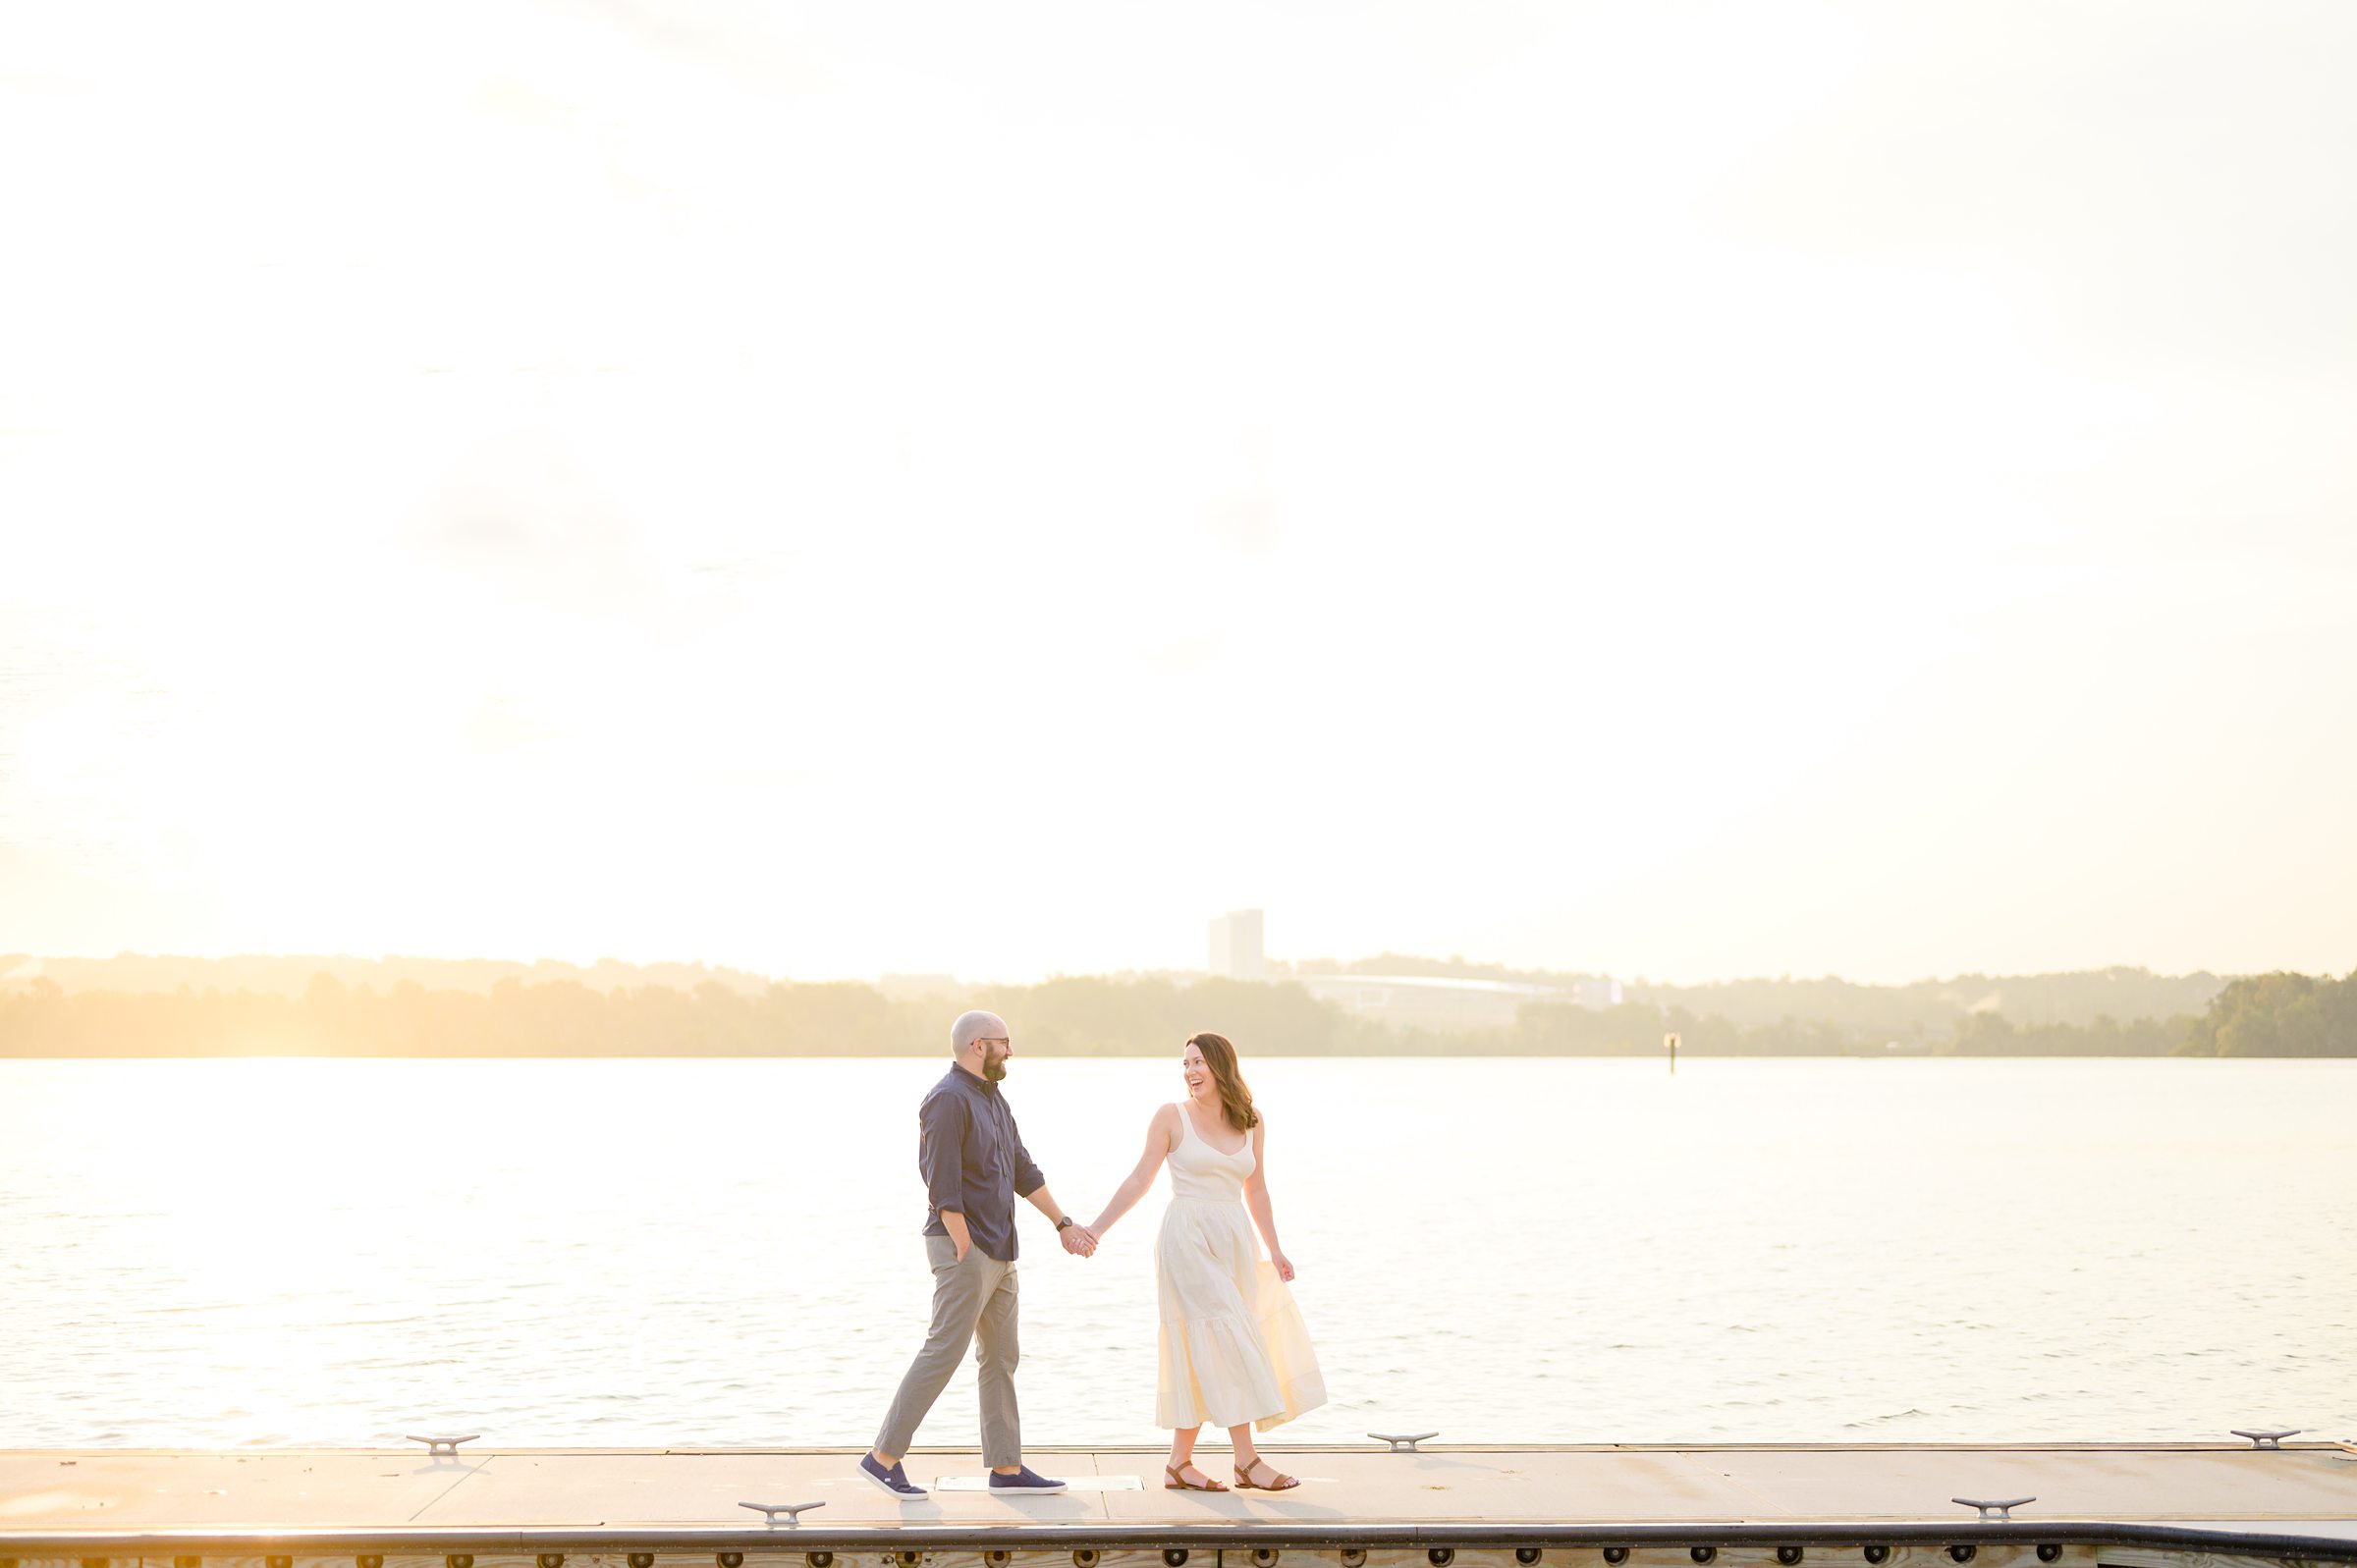 Old Town Alexandria engagement photos by the waterfront in Alexandria, Virginia photographed by Baltimore Wedding Photographer Cait Kramer.